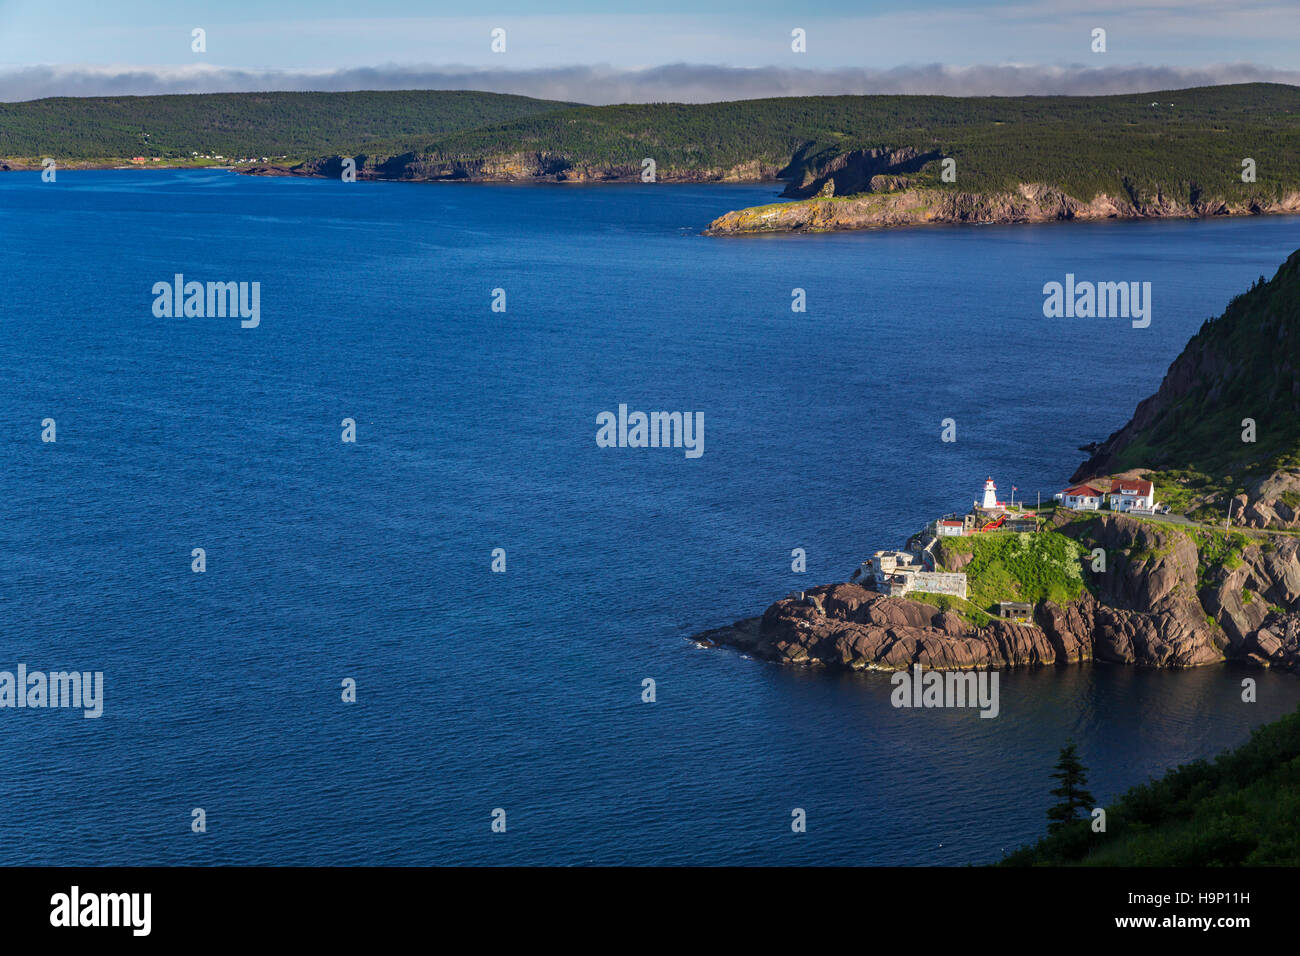 The rugged coastline and Fort Amherst from signal Hill, St. John's Newfoundland and Labrador, Canada. Stock Photo